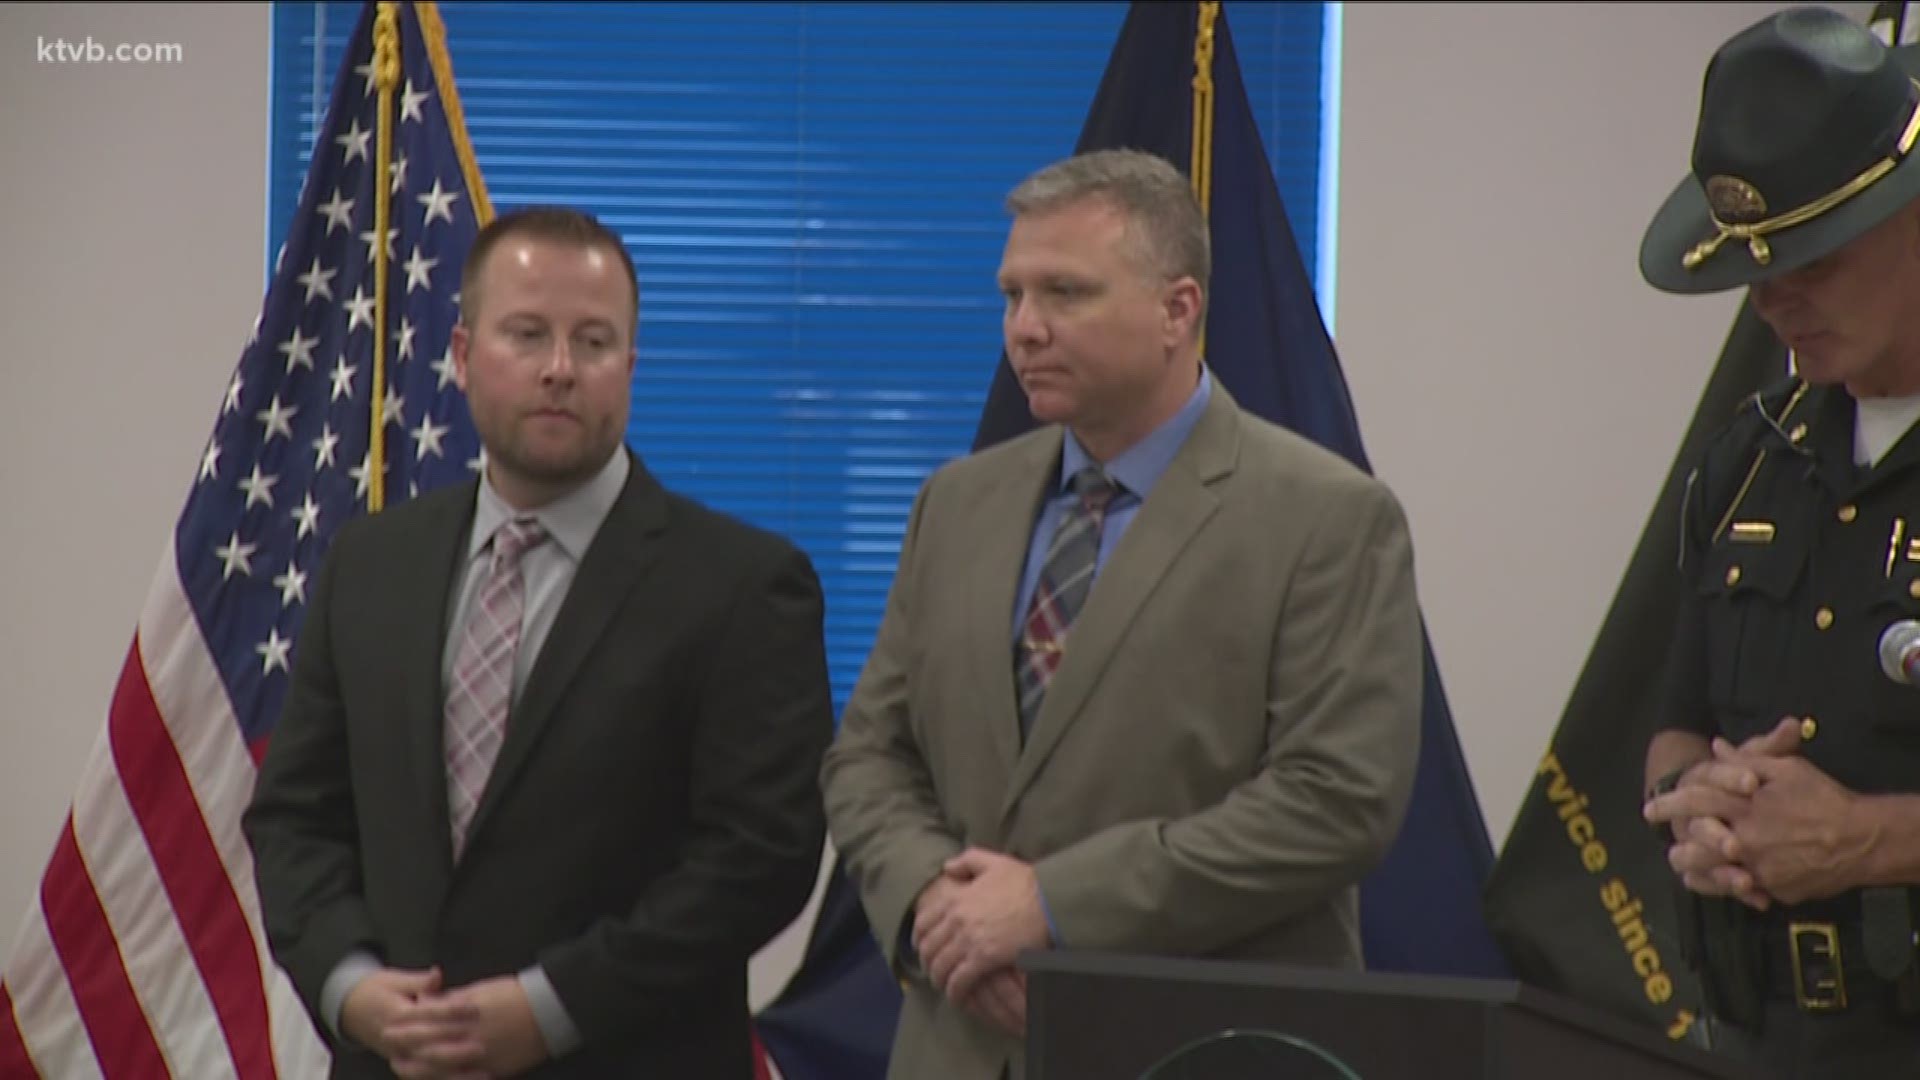 Two men were honored with life-saving awards.